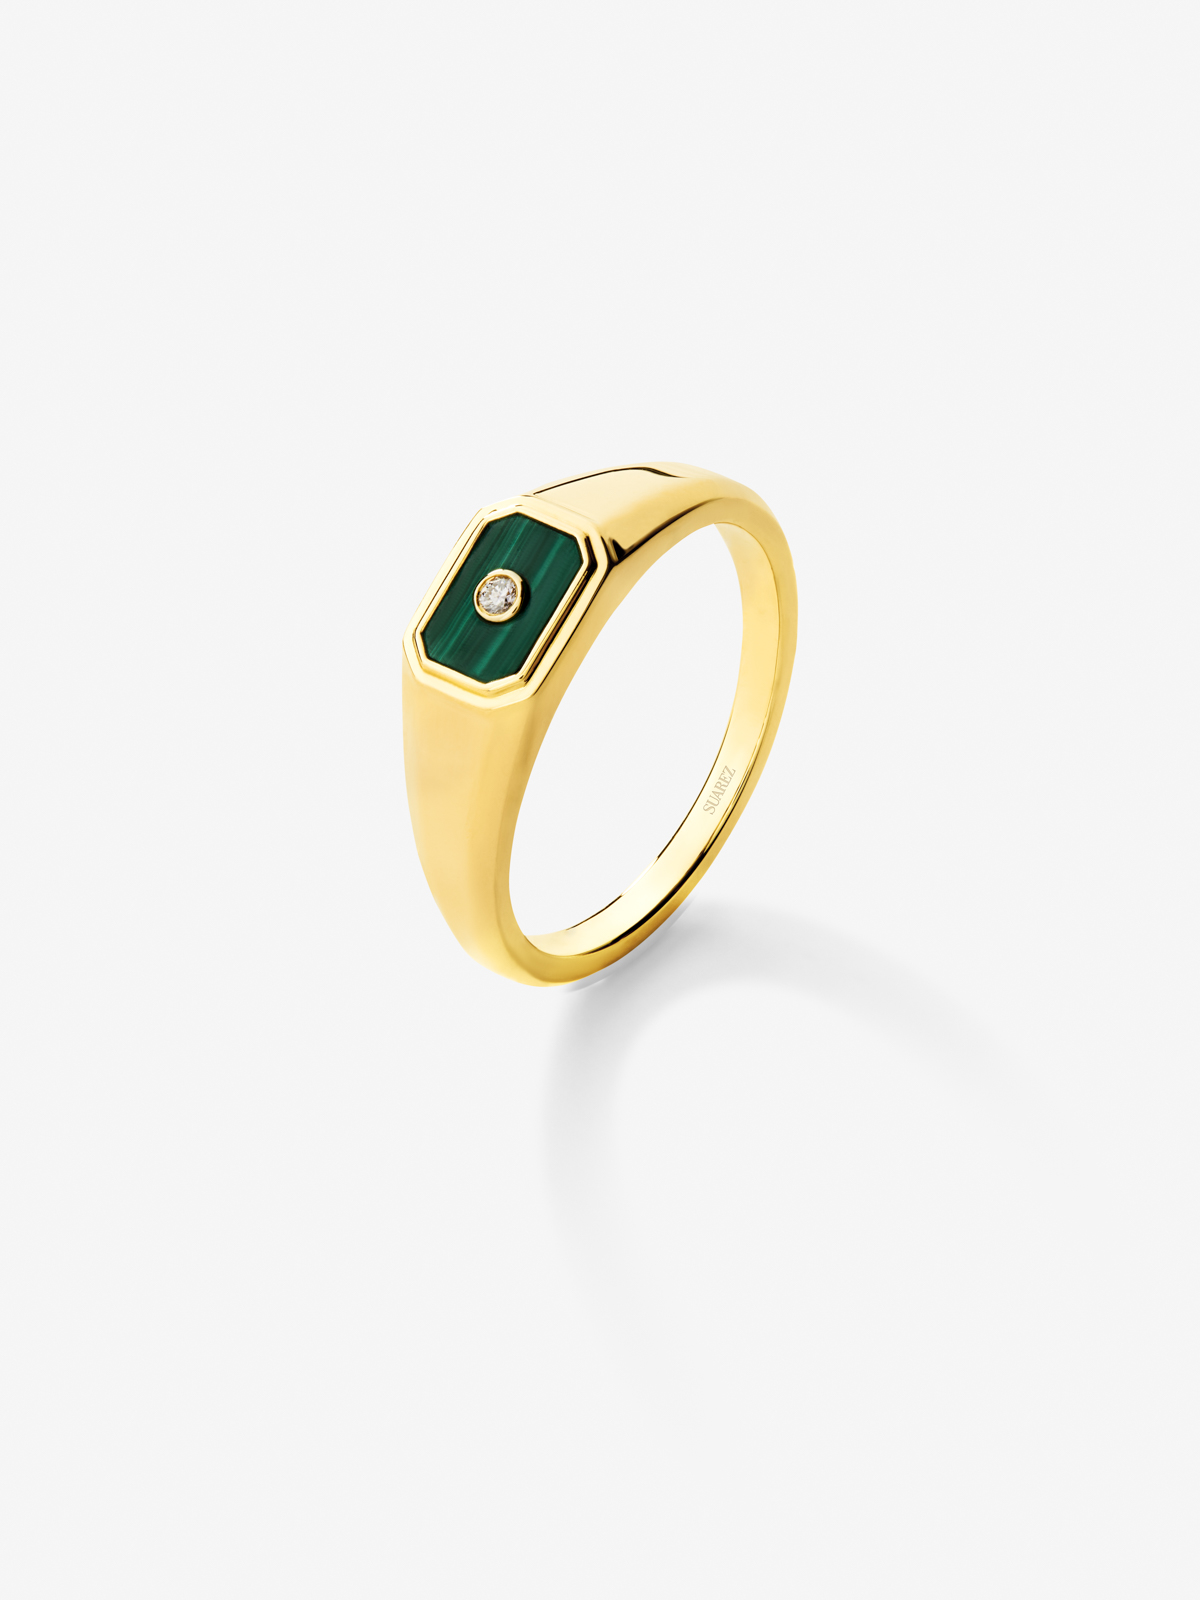 Small yellow gold seal ring of 18k with 0.2 cts green malaquita and white diamond in 0.01 cts